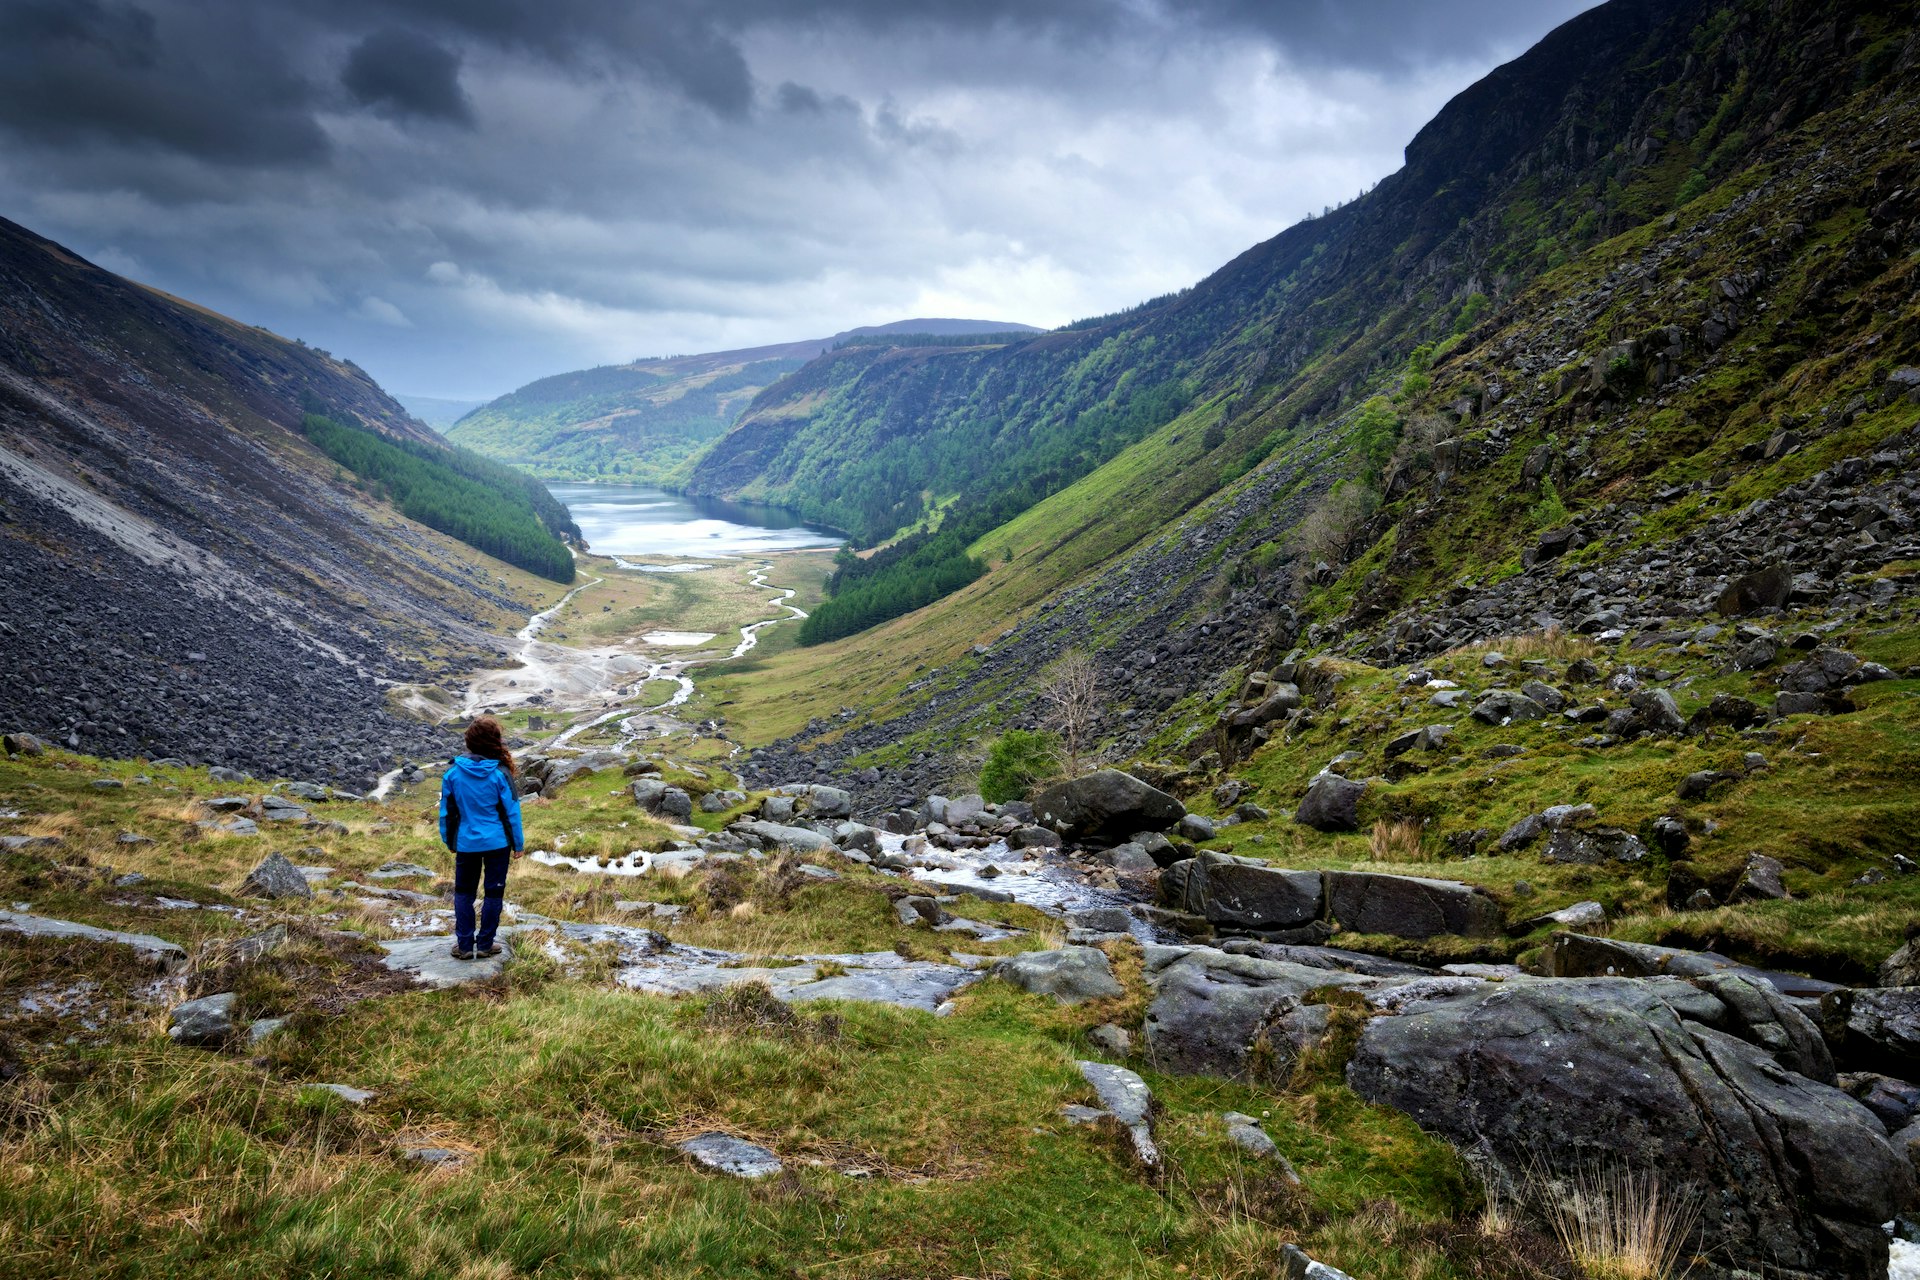 Features - Woman looking out on Glendalough Valley along Gleneaolo Valley walk in Wicklow Mountains, Ireland, stormy spring afternoon